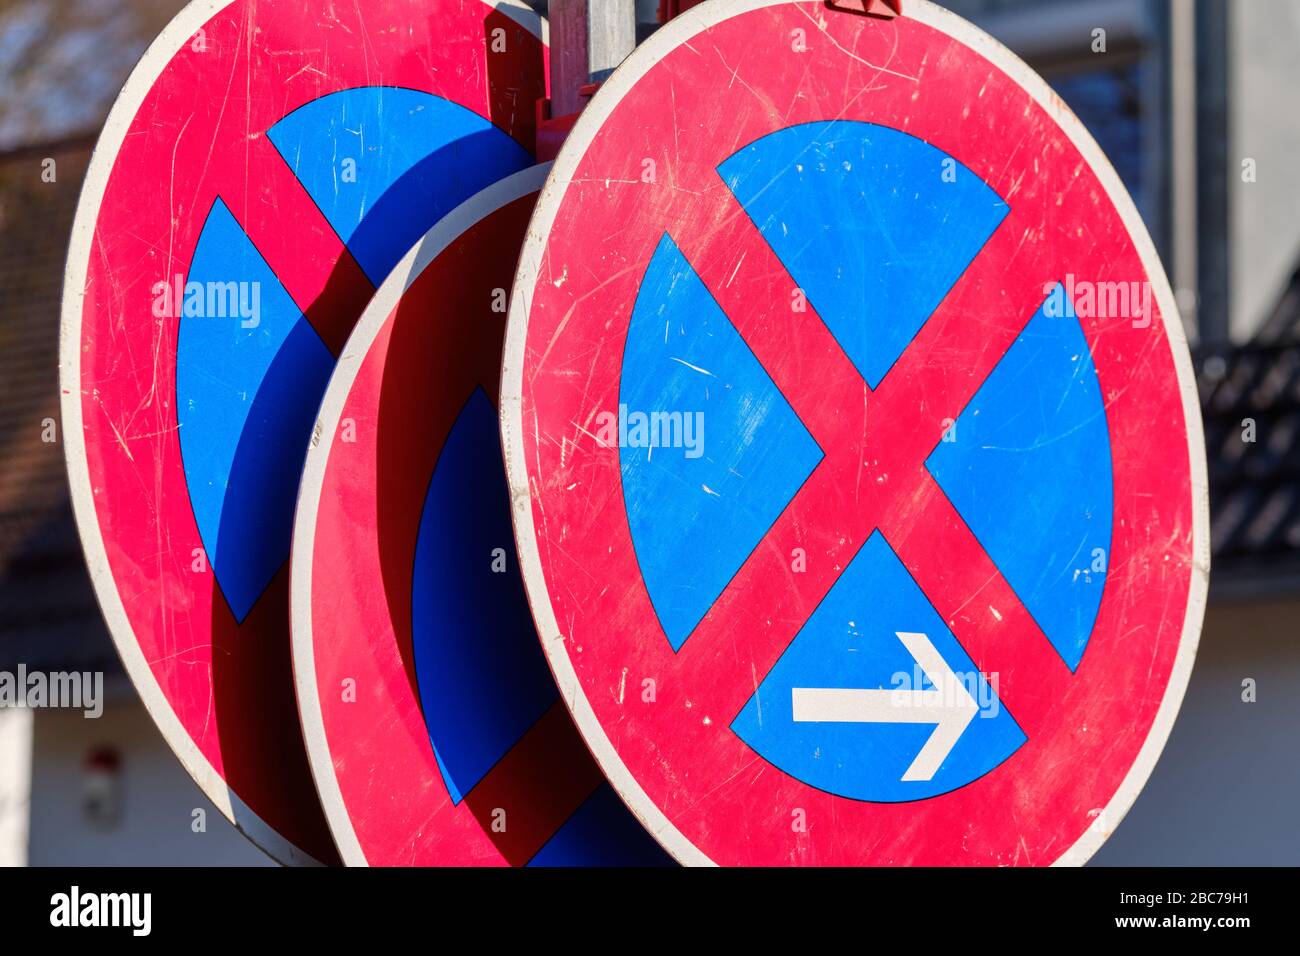 Three traffic signs with absolute no stopping restriction standing in a row on a construction site in front of a house. Seen in Germany in April. Stock Photo